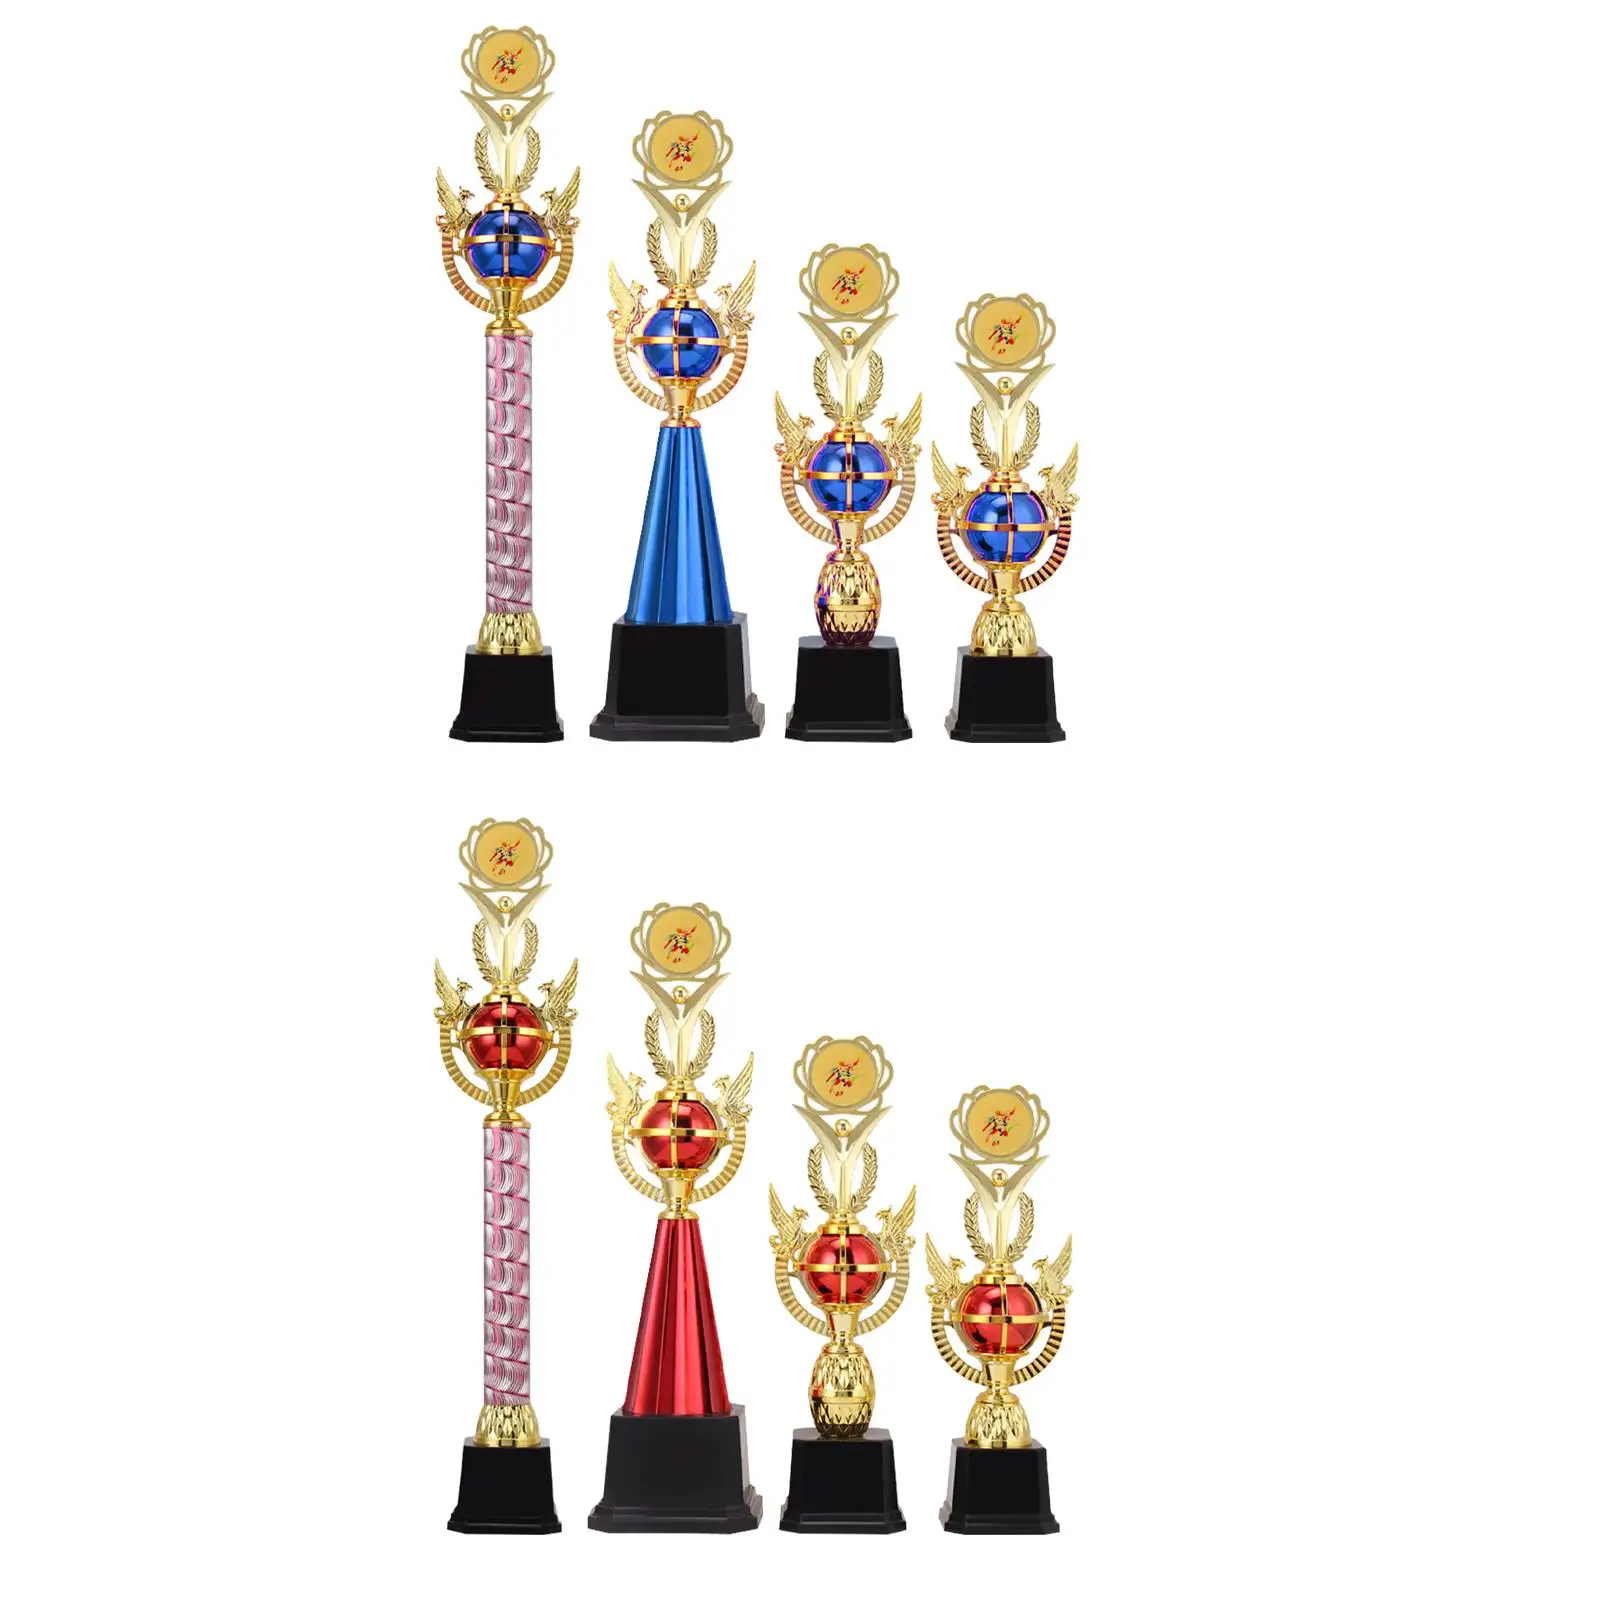 Award Trophy Cup Trophies Prize for Party Celebrations Props Speech Contest